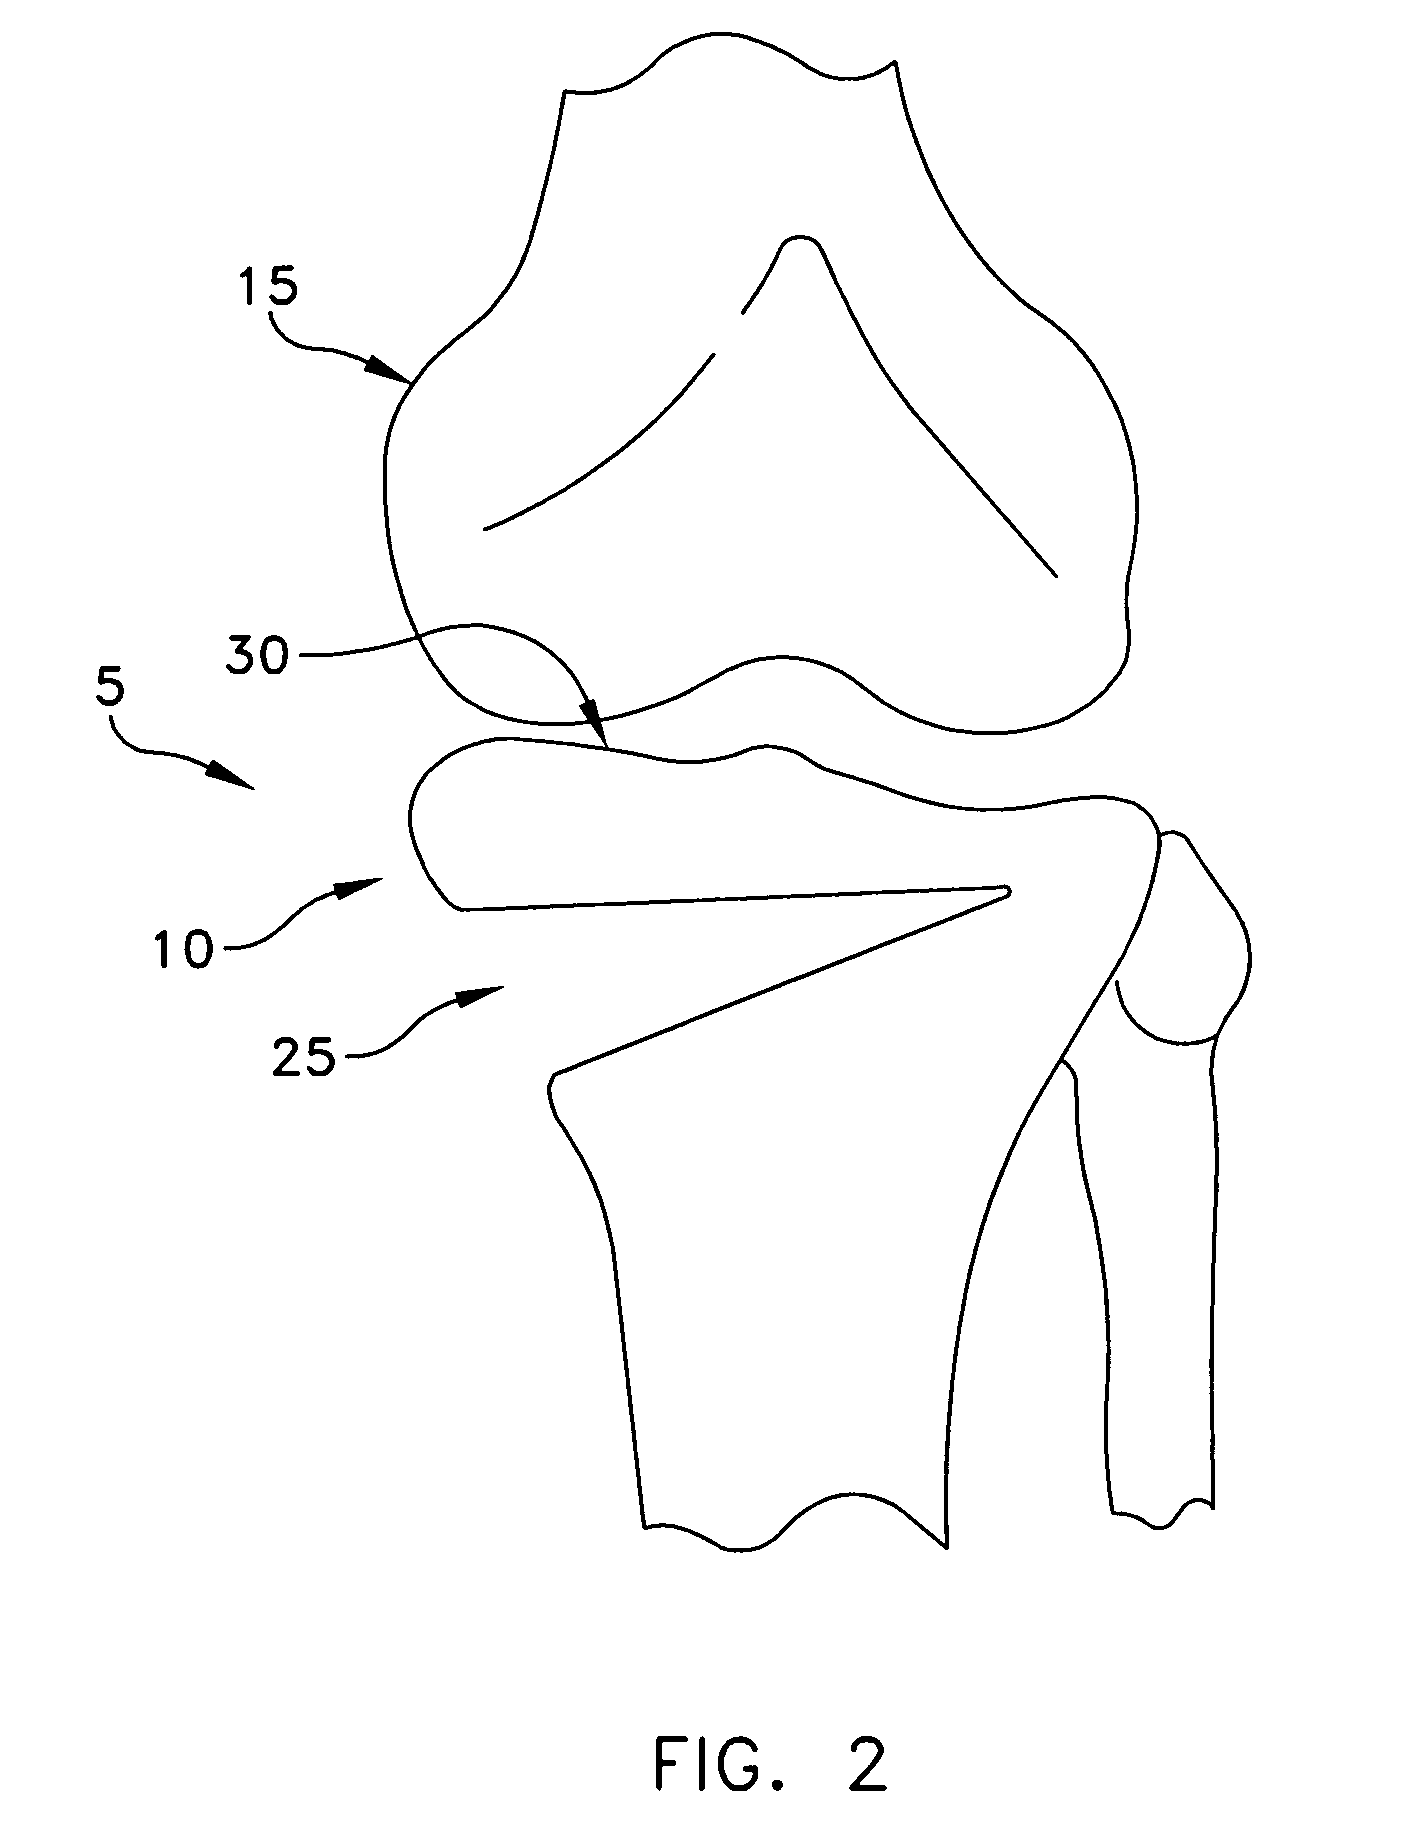 Multi-part implant for open wedge knee osteotomies